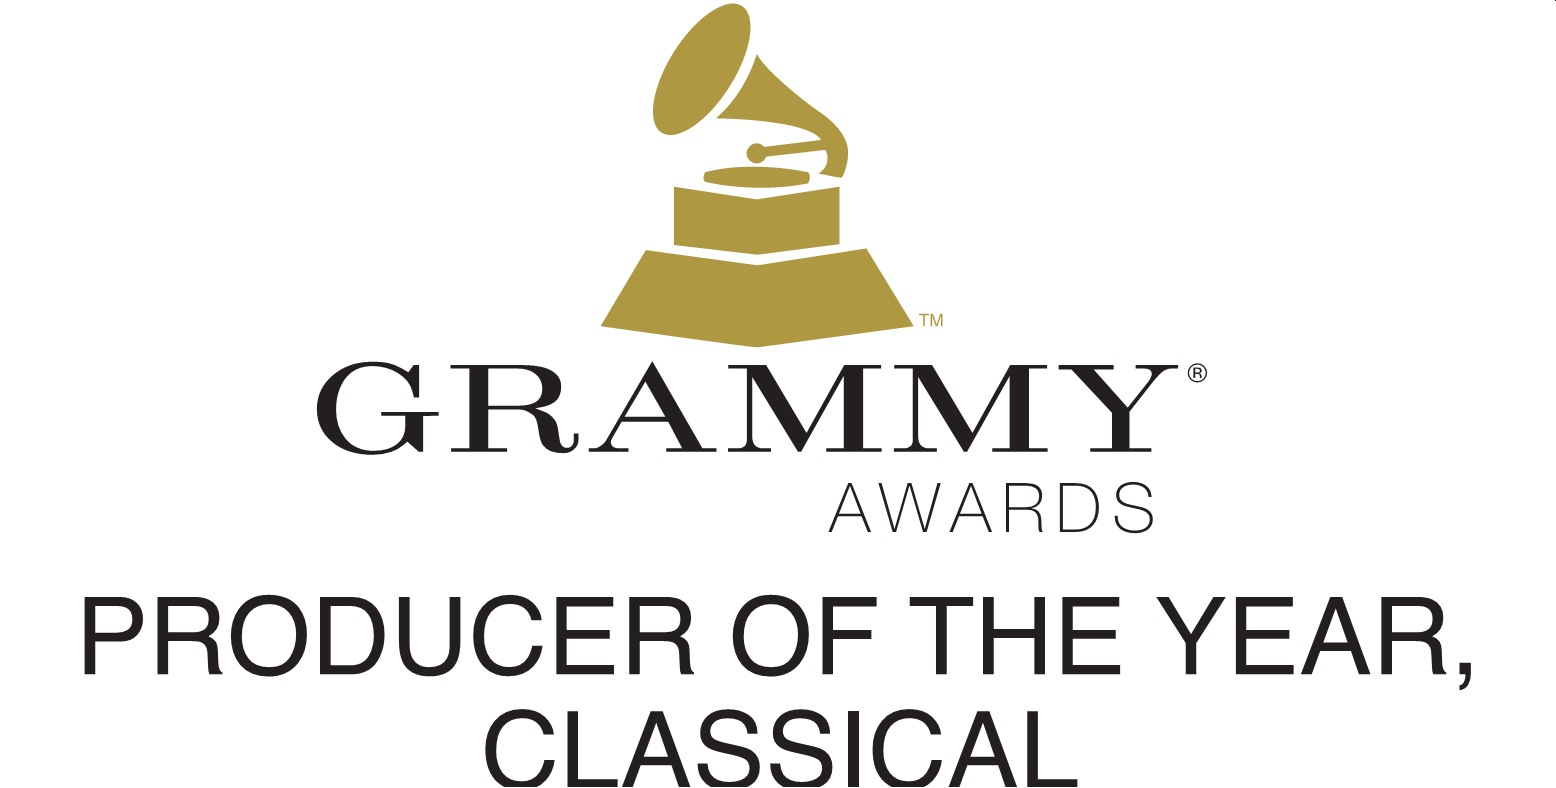 Grammy Award: 'Producer Of The Year, Classical' (2012)